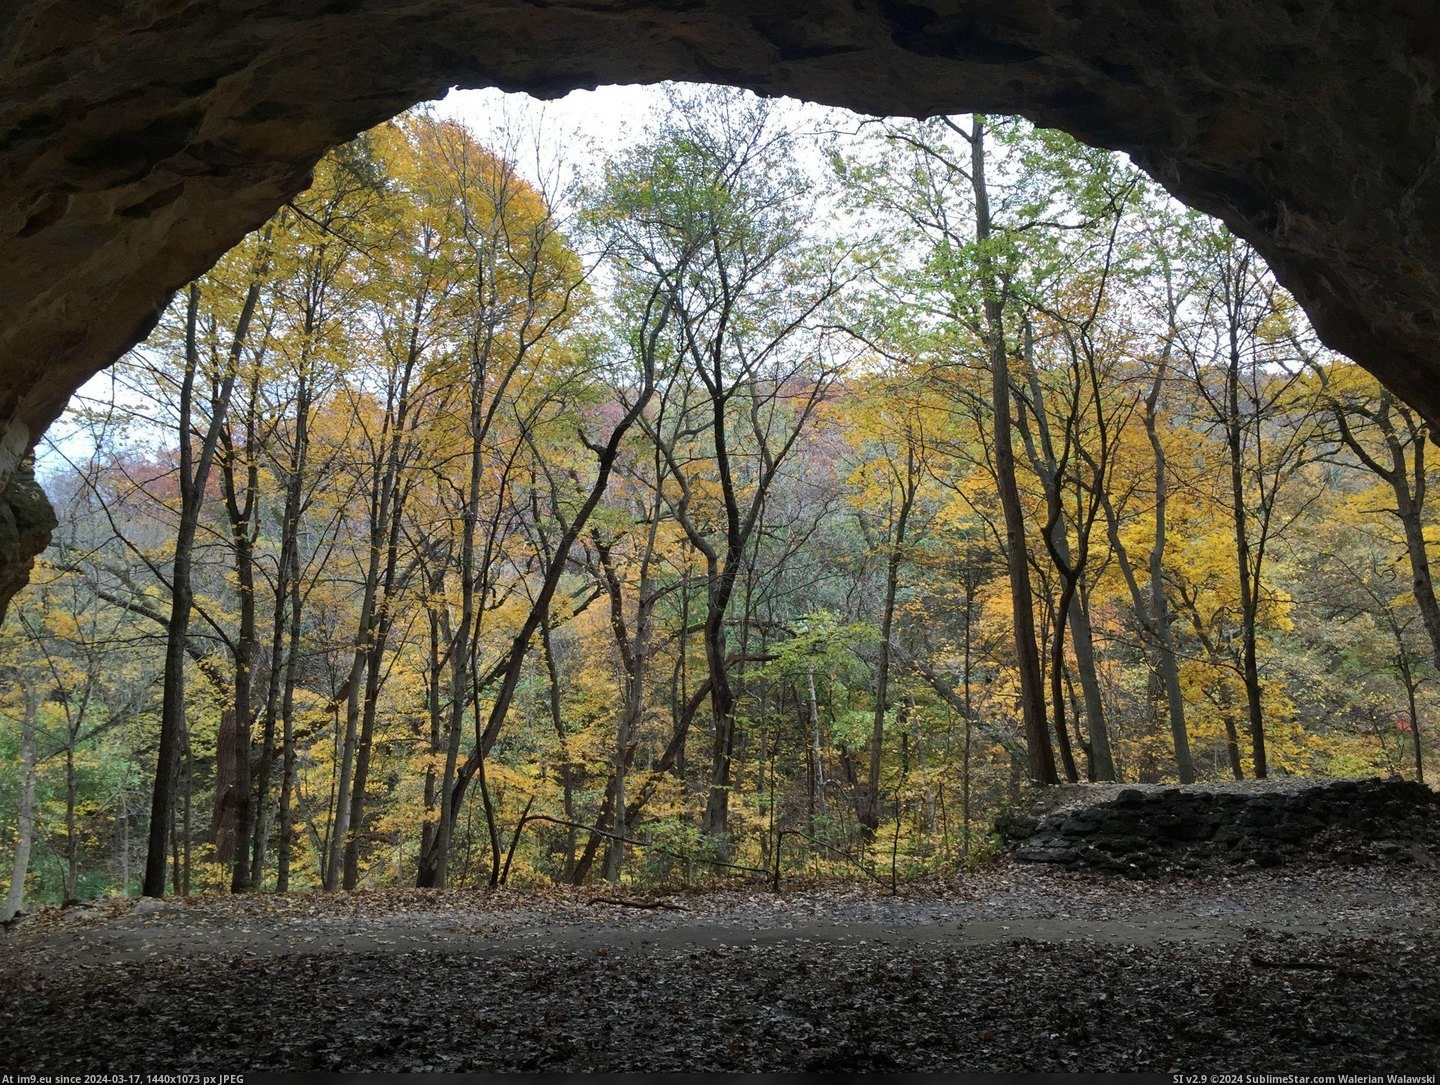 #Park #State #2448x1836 #Illinois #Rock #Starved [Earthporn] Starved Rock State Park, Oglesby, Illinois [2448x1836] Pic. (Изображение из альбом My r/EARTHPORN favs))